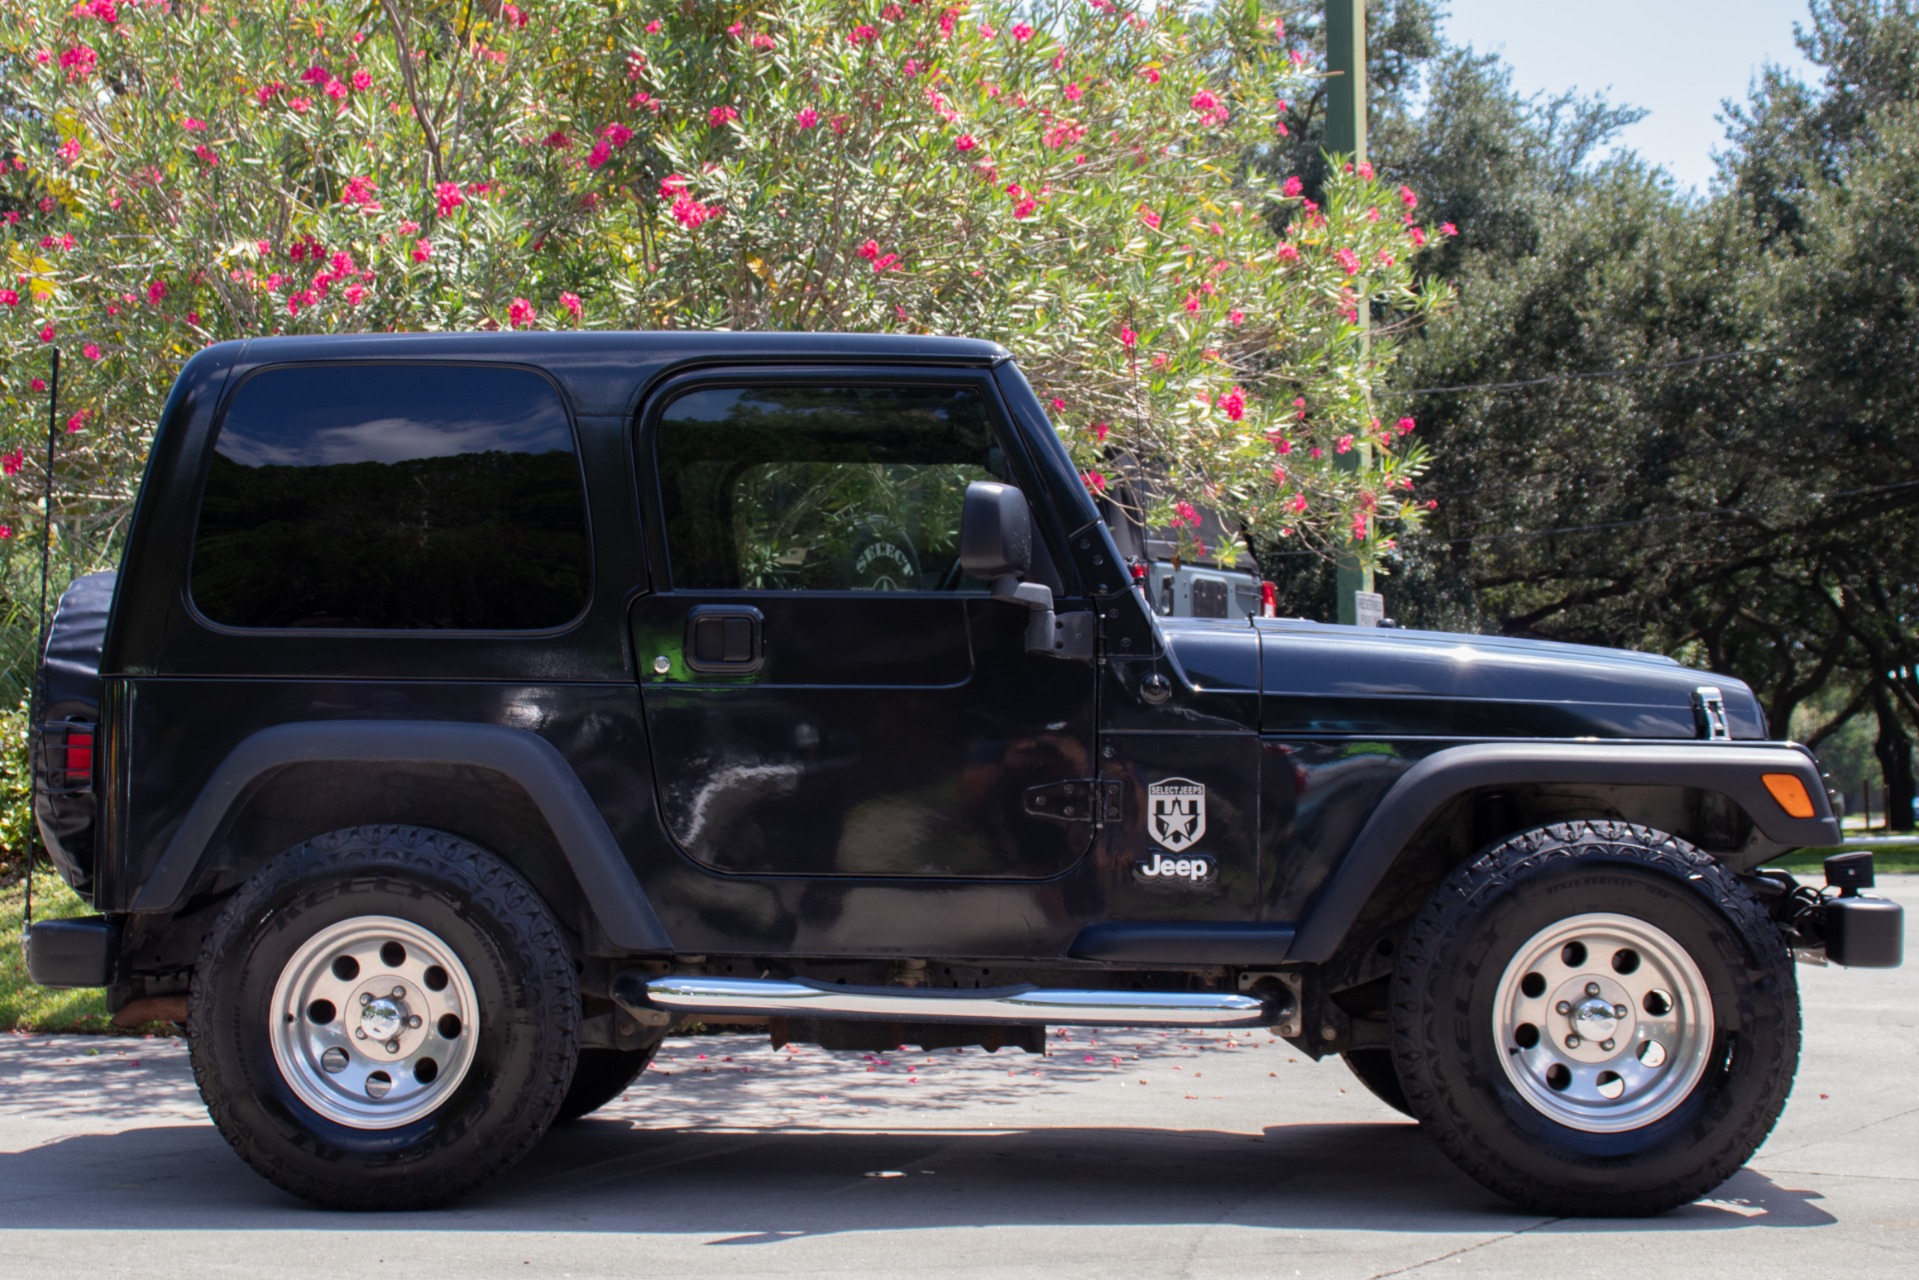 Used 2003 Jeep Wrangler X For Sale ($13,995) | Select ...